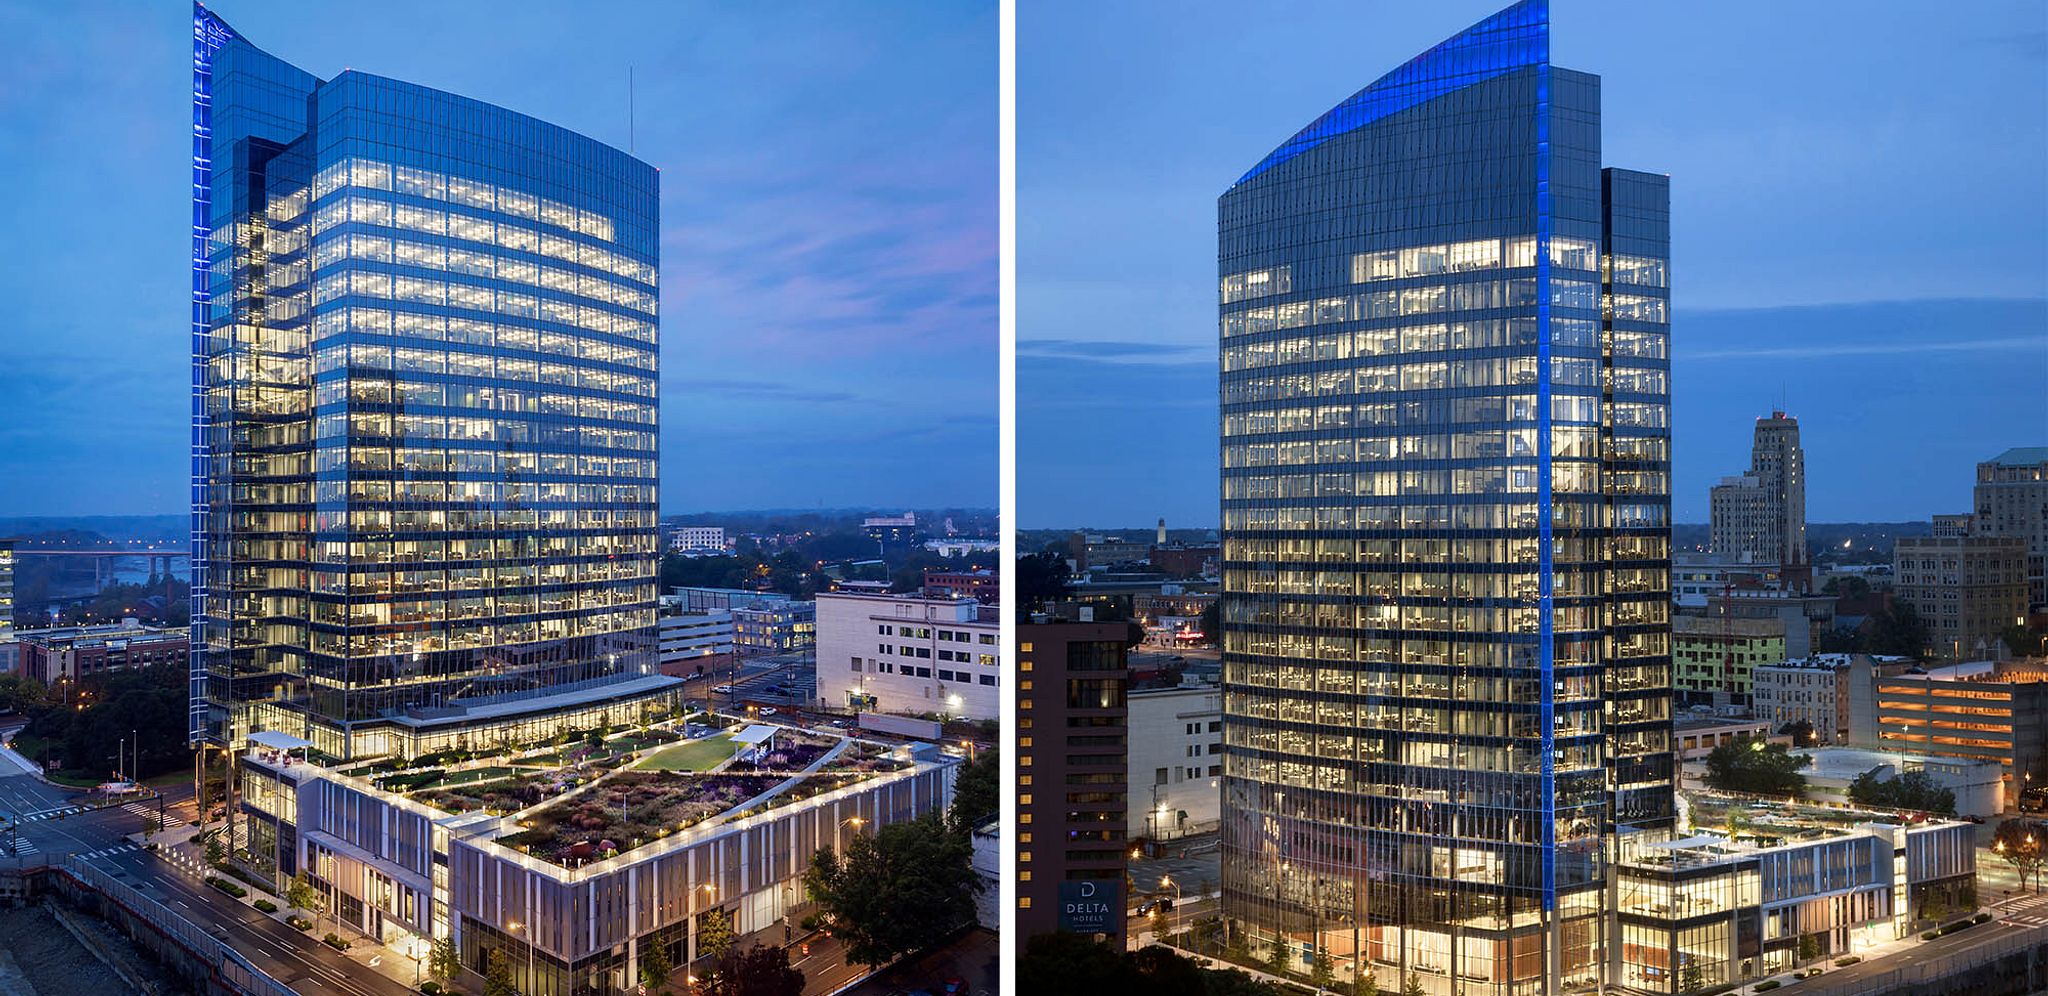 dominion-energy-new-downtown-office-tower-richmond-va-office-tower